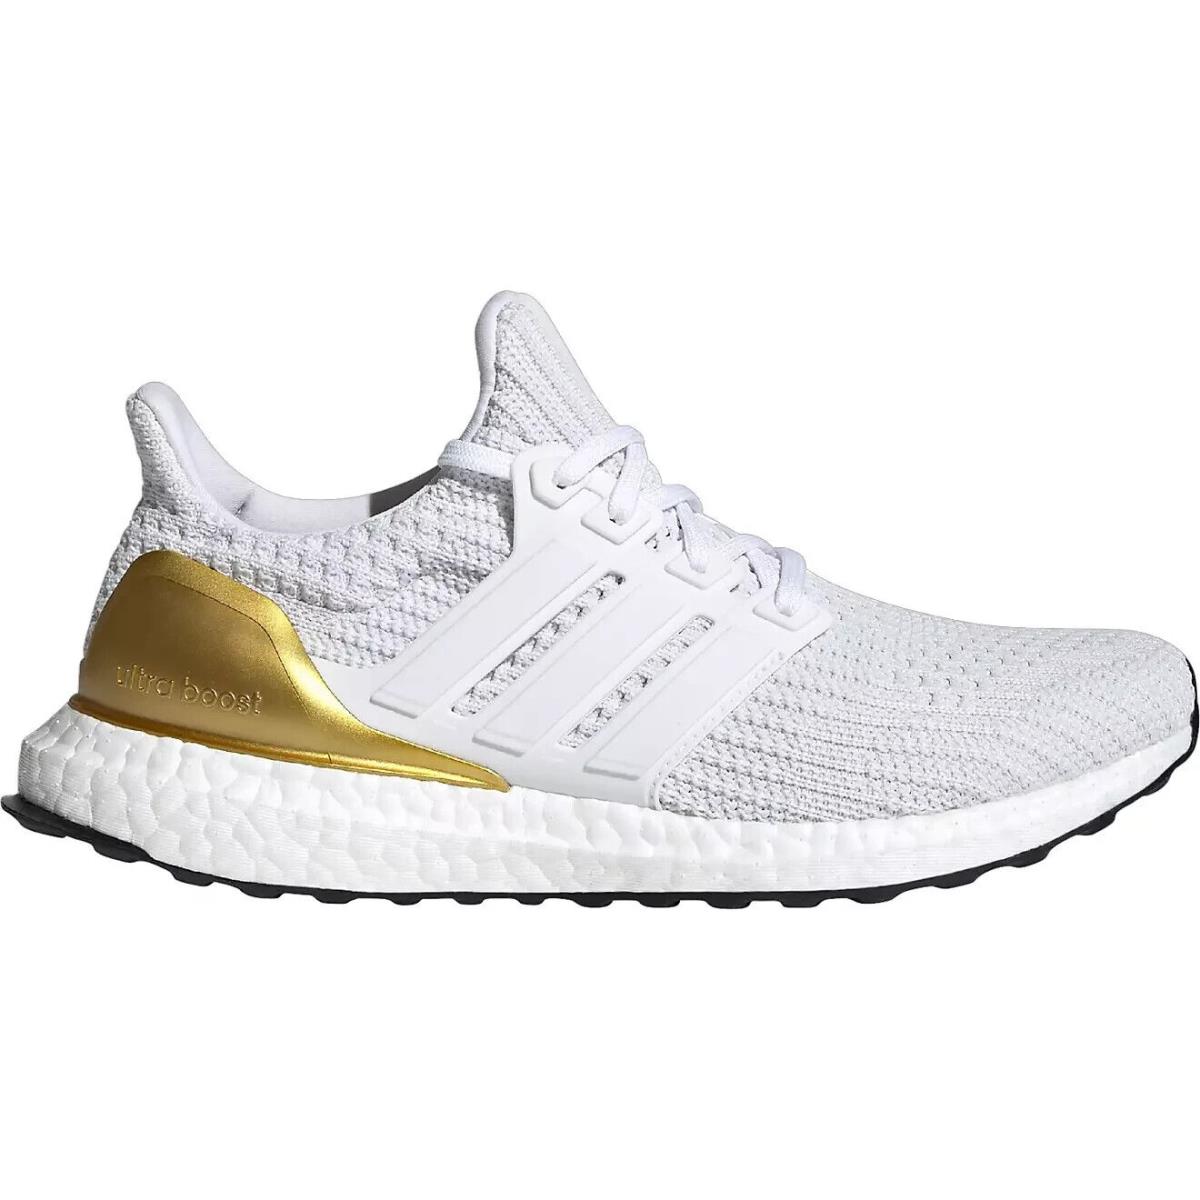 Adidas Ultraboost Dna 4.0 x White/rust or Copper Running Athletic Shoes Size 9